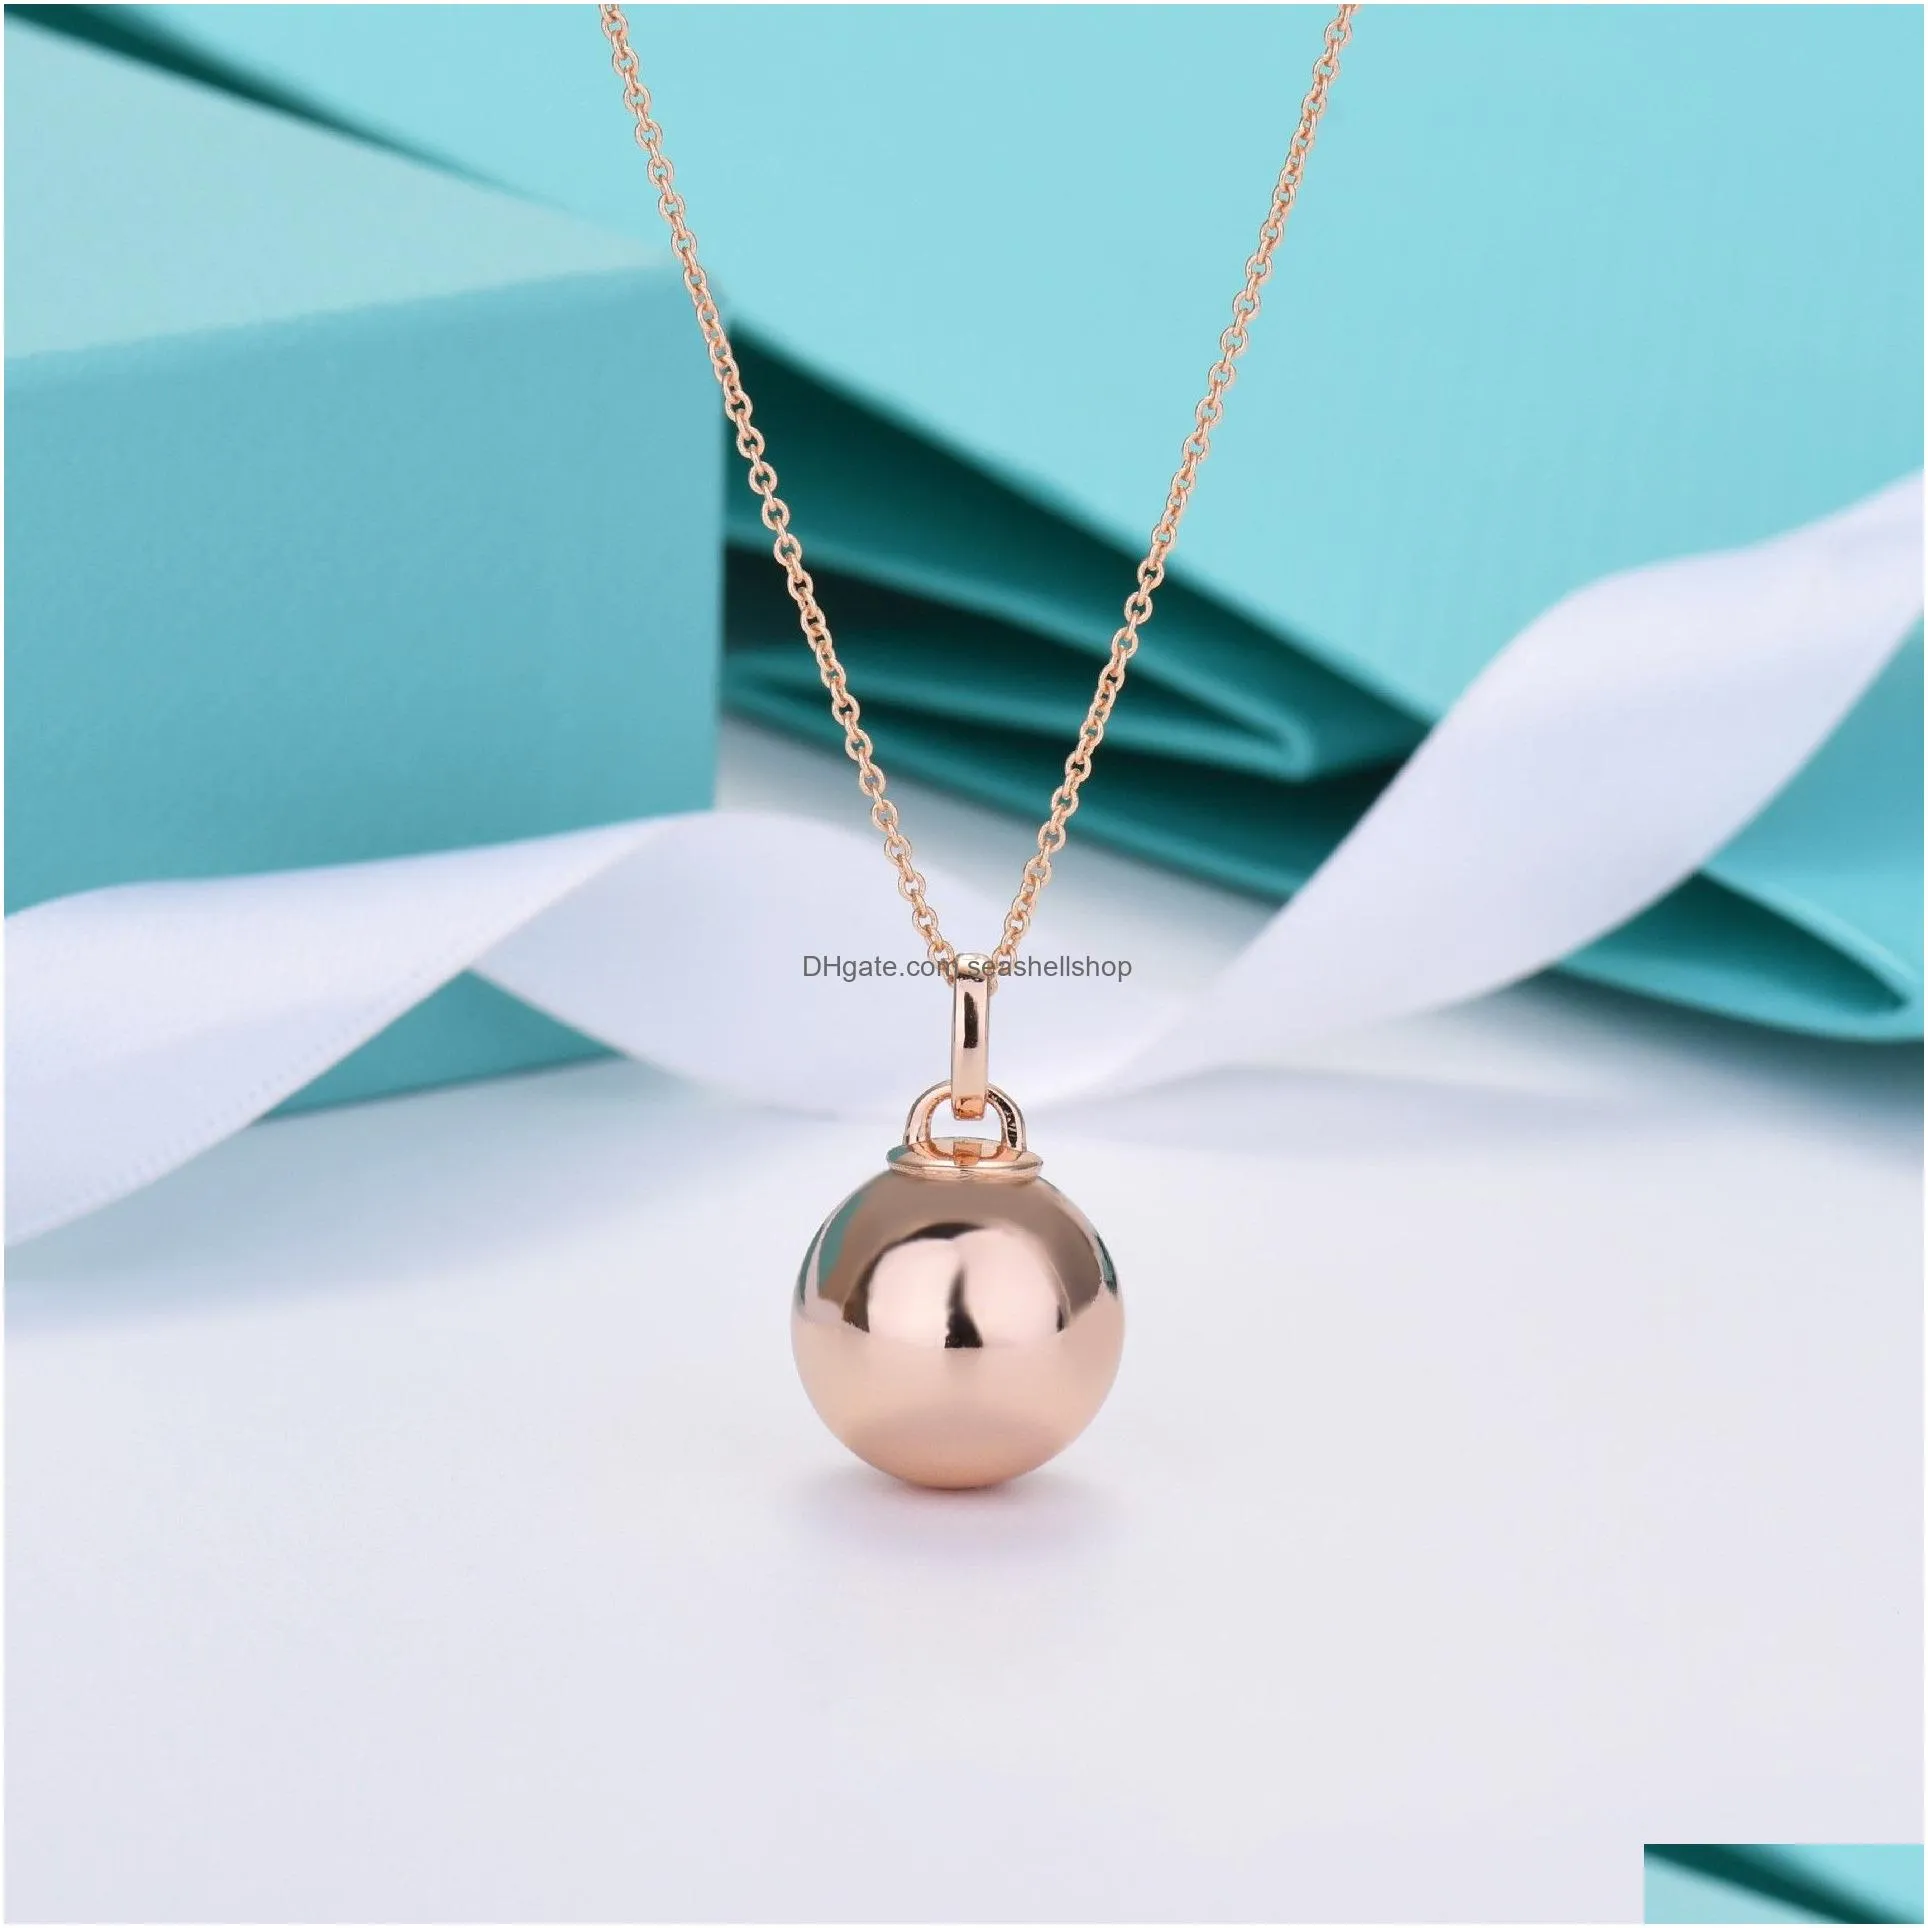 High-quality T home new golden ball women`s fashion necklace 18K European and American style design